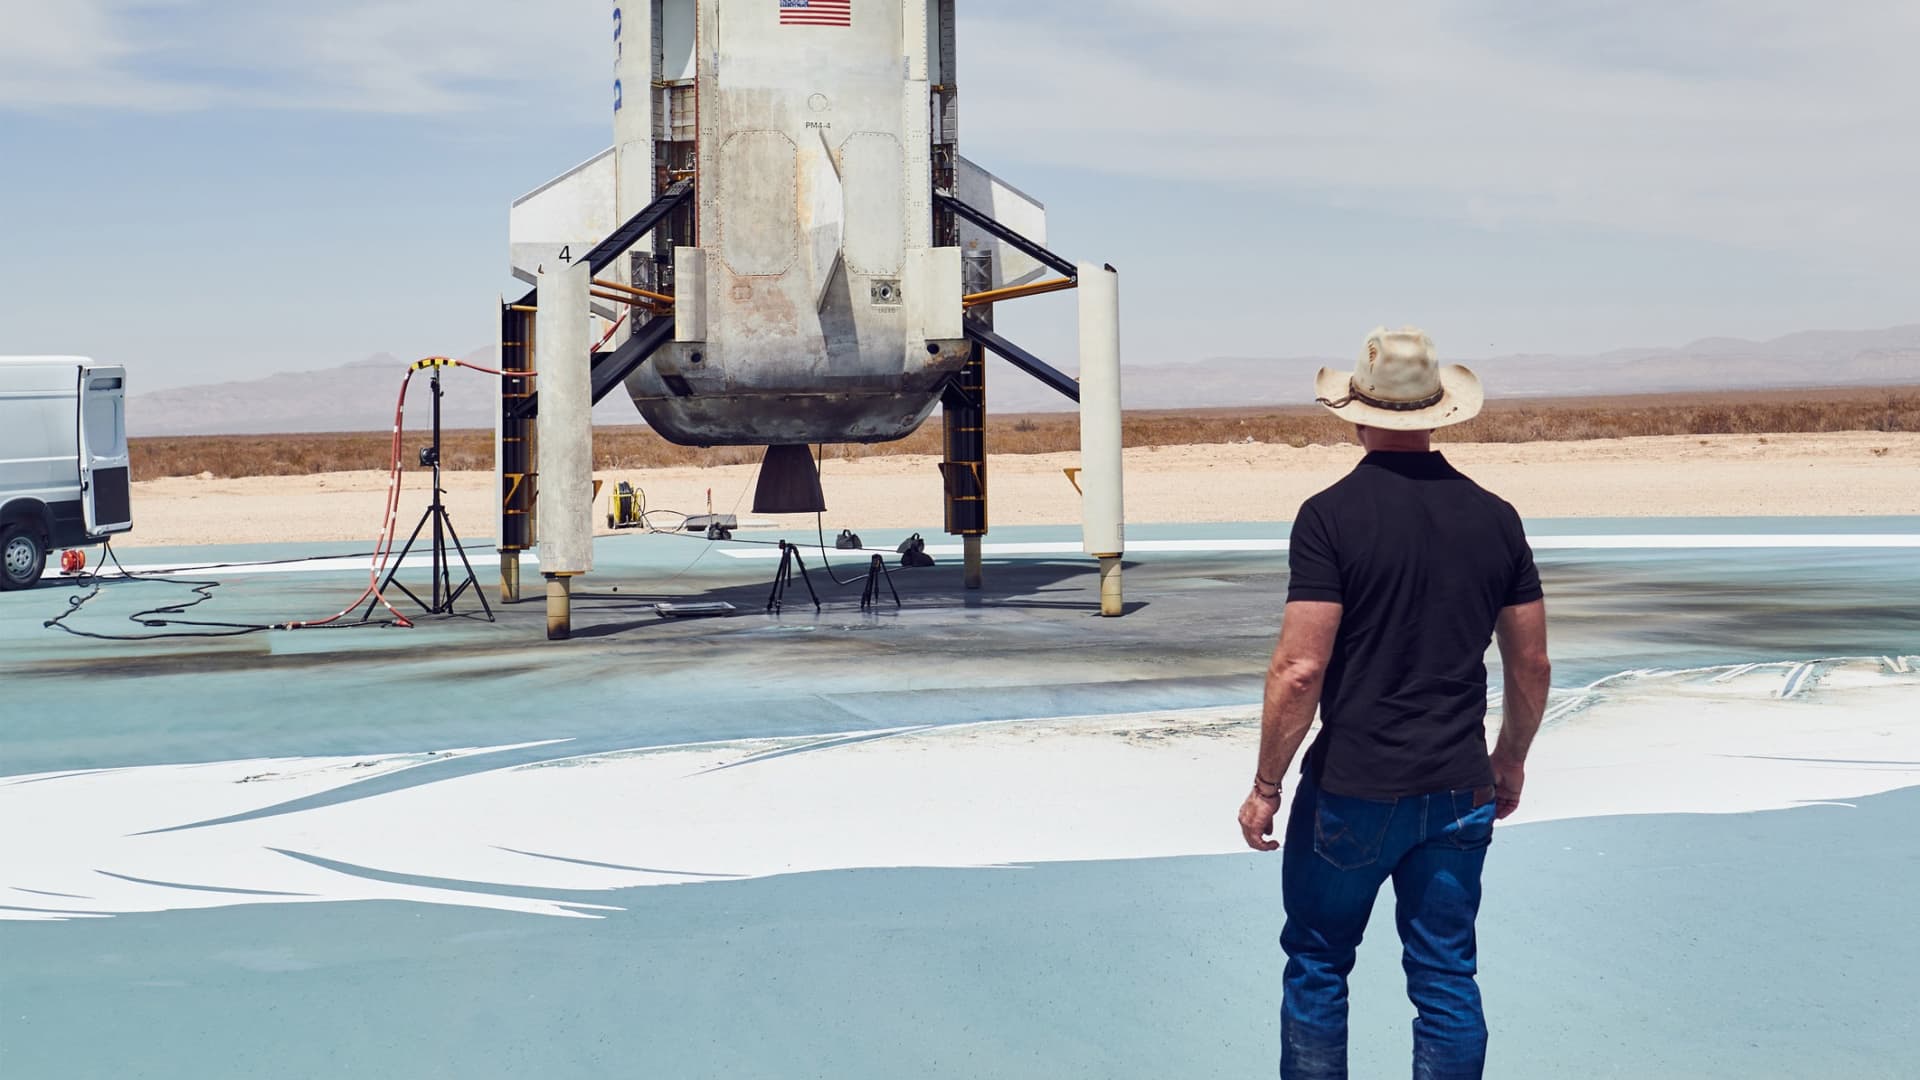 Jeff Bezos takes a look at the New Shepard rocket booster on the landing pad after a successful NS-15 flight and landing in April 2021.